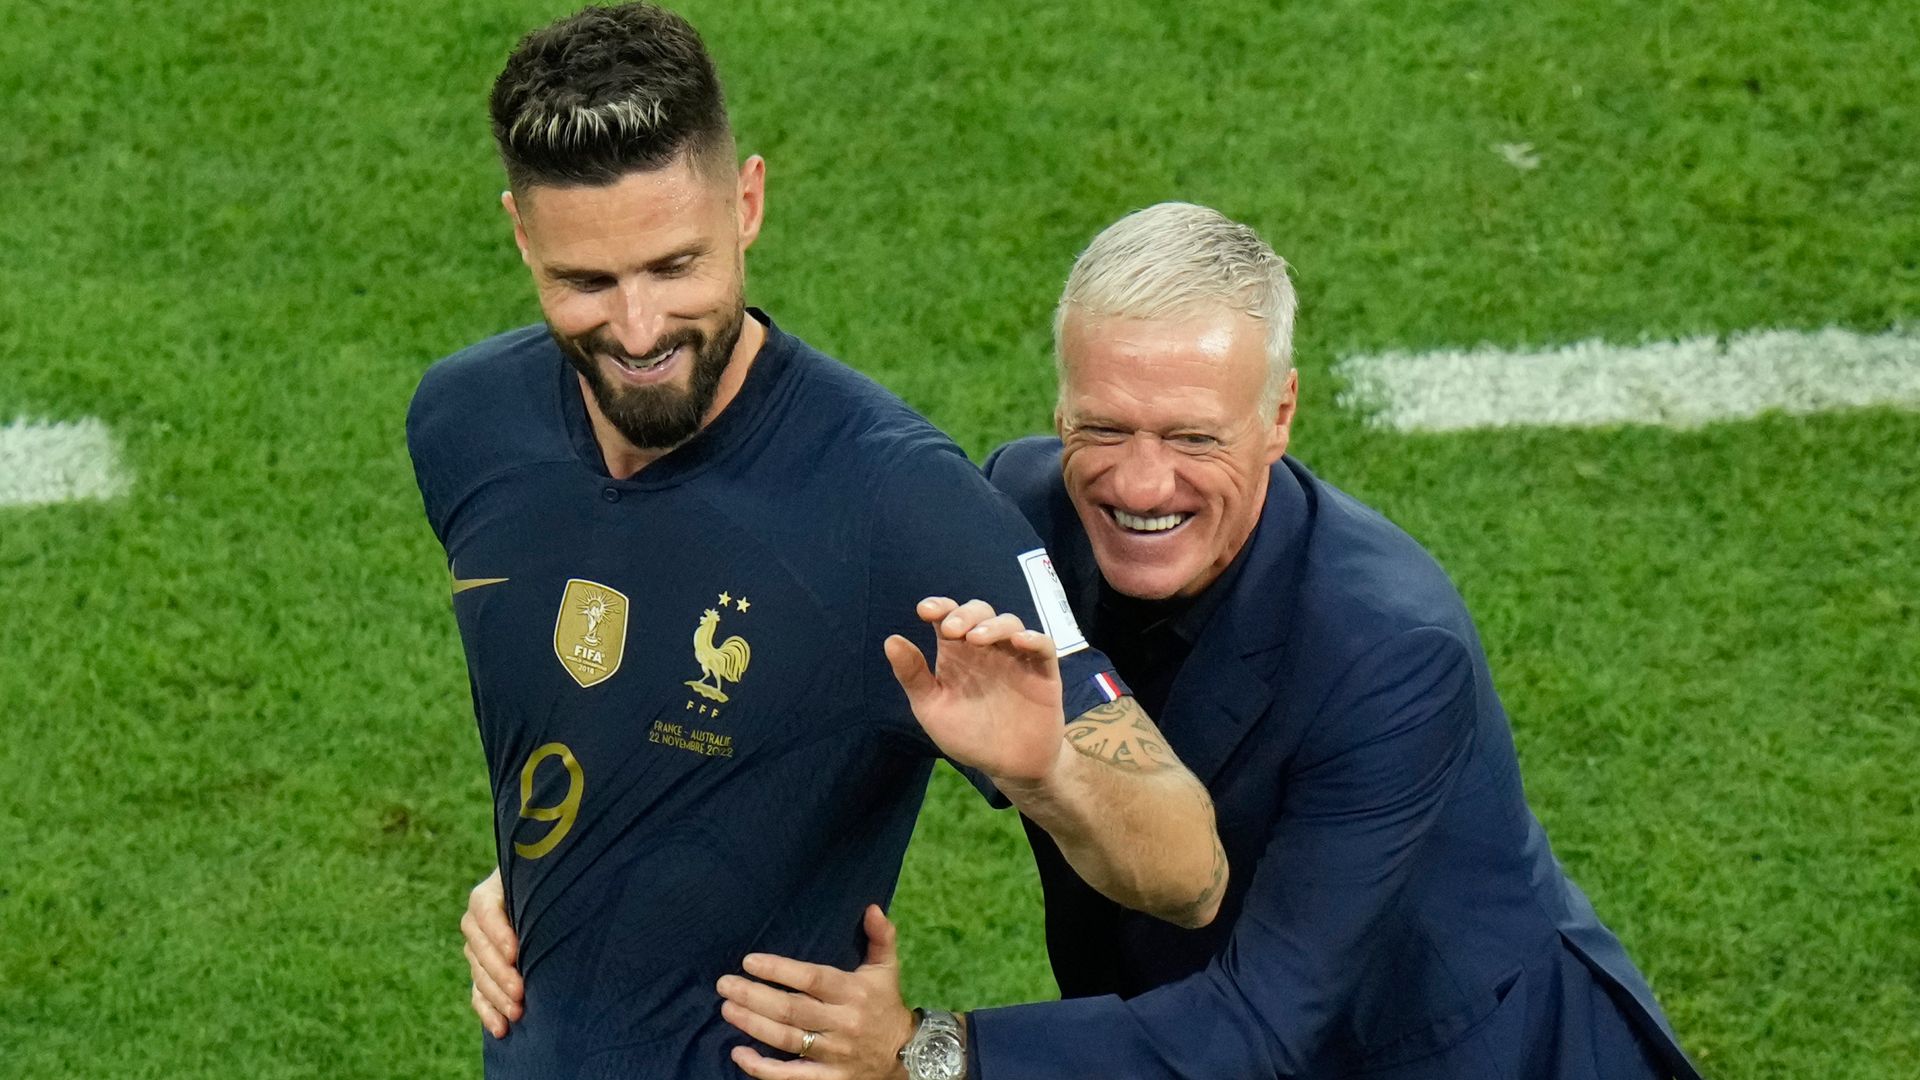 World Cup hits and misses: France rival England's display, is Mbappe the best?